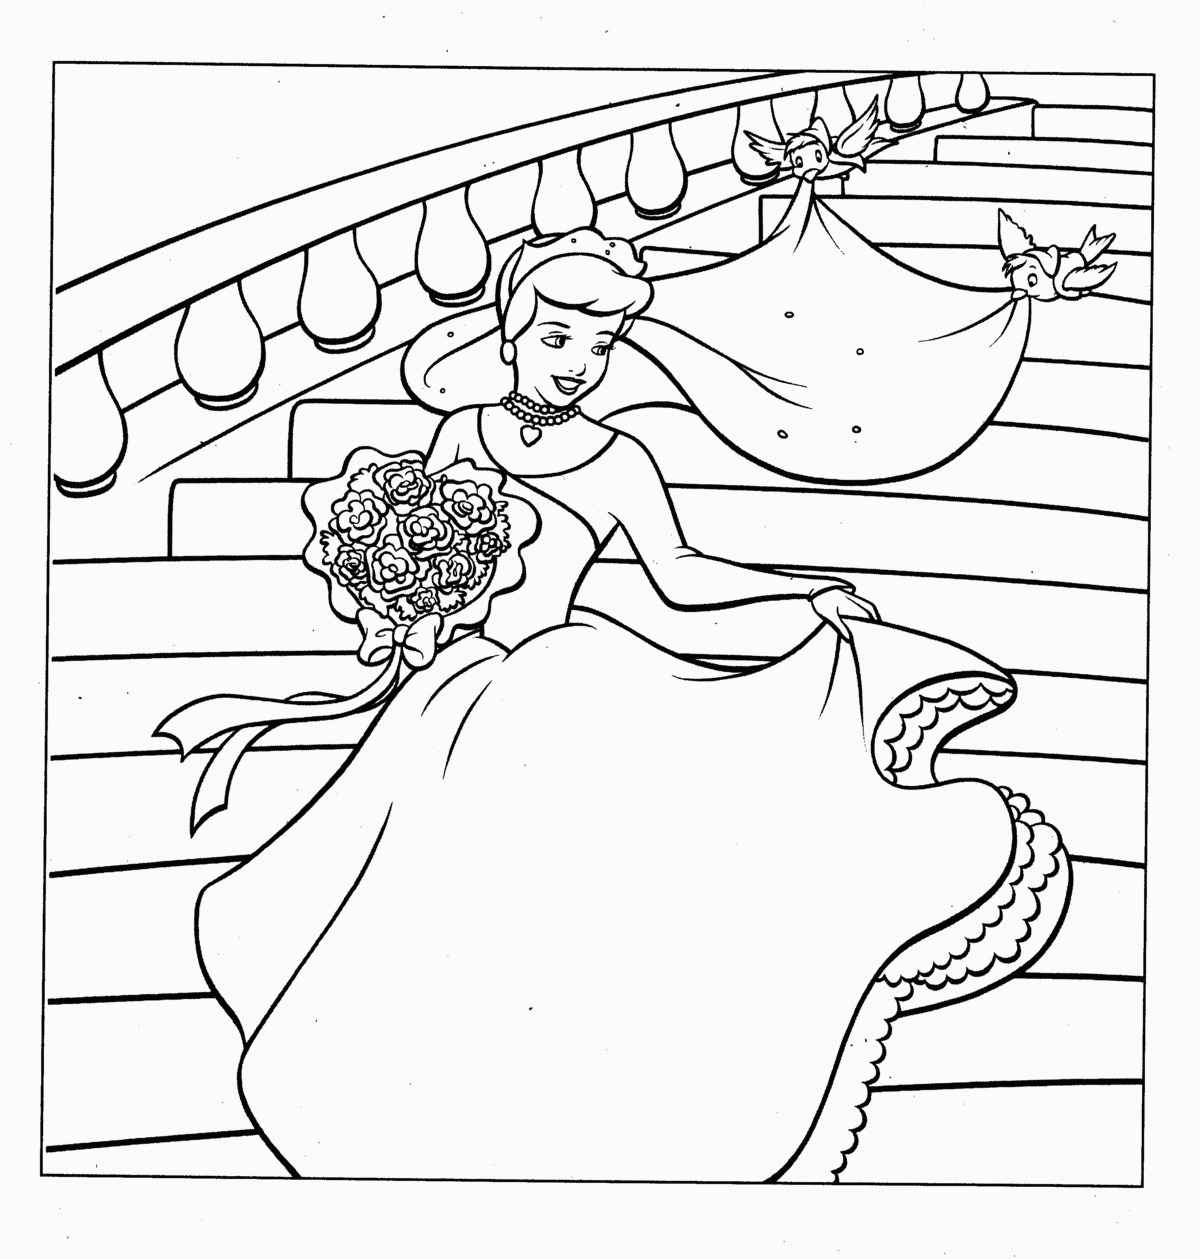 Free Cinderella Coloring Pages Free Printable Cinderella Activity Sheets And Coloring For